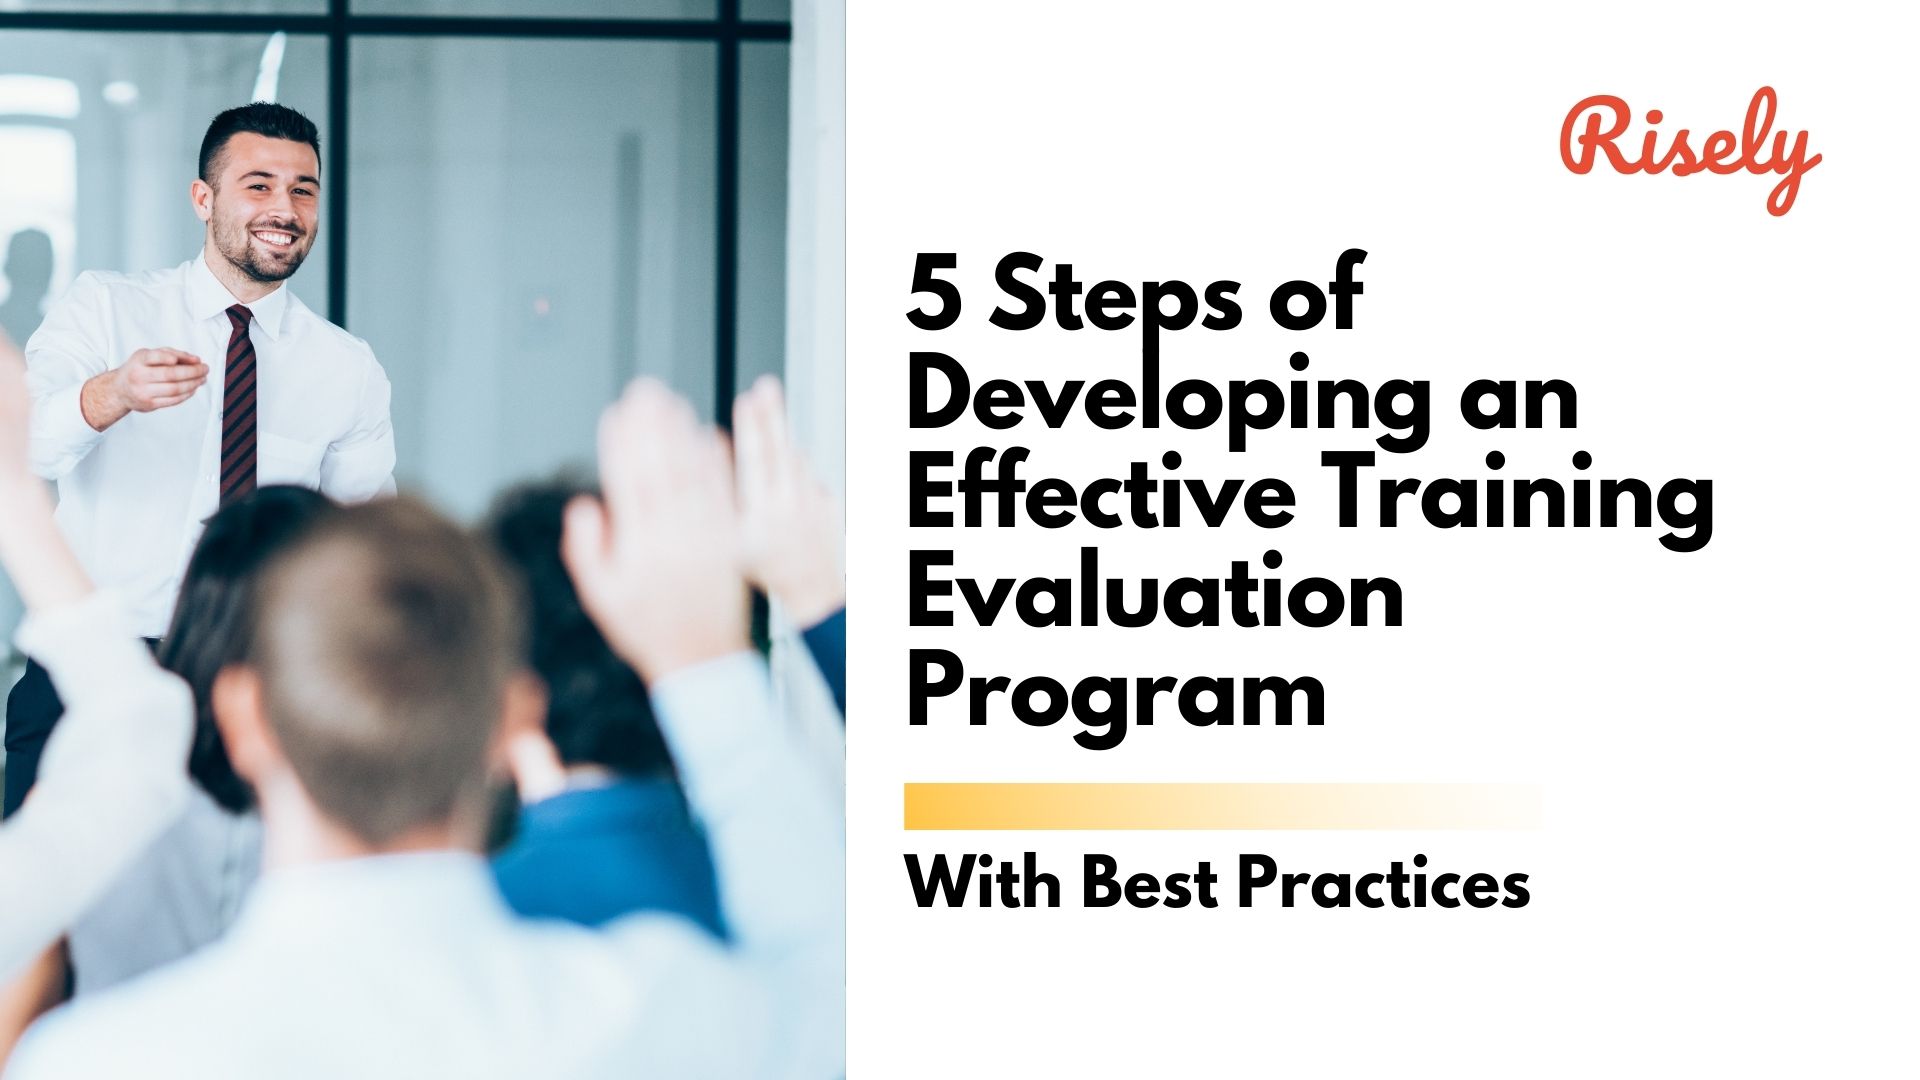 5 Steps of Developing an Effective Training Evaluation Program: With Best Practices